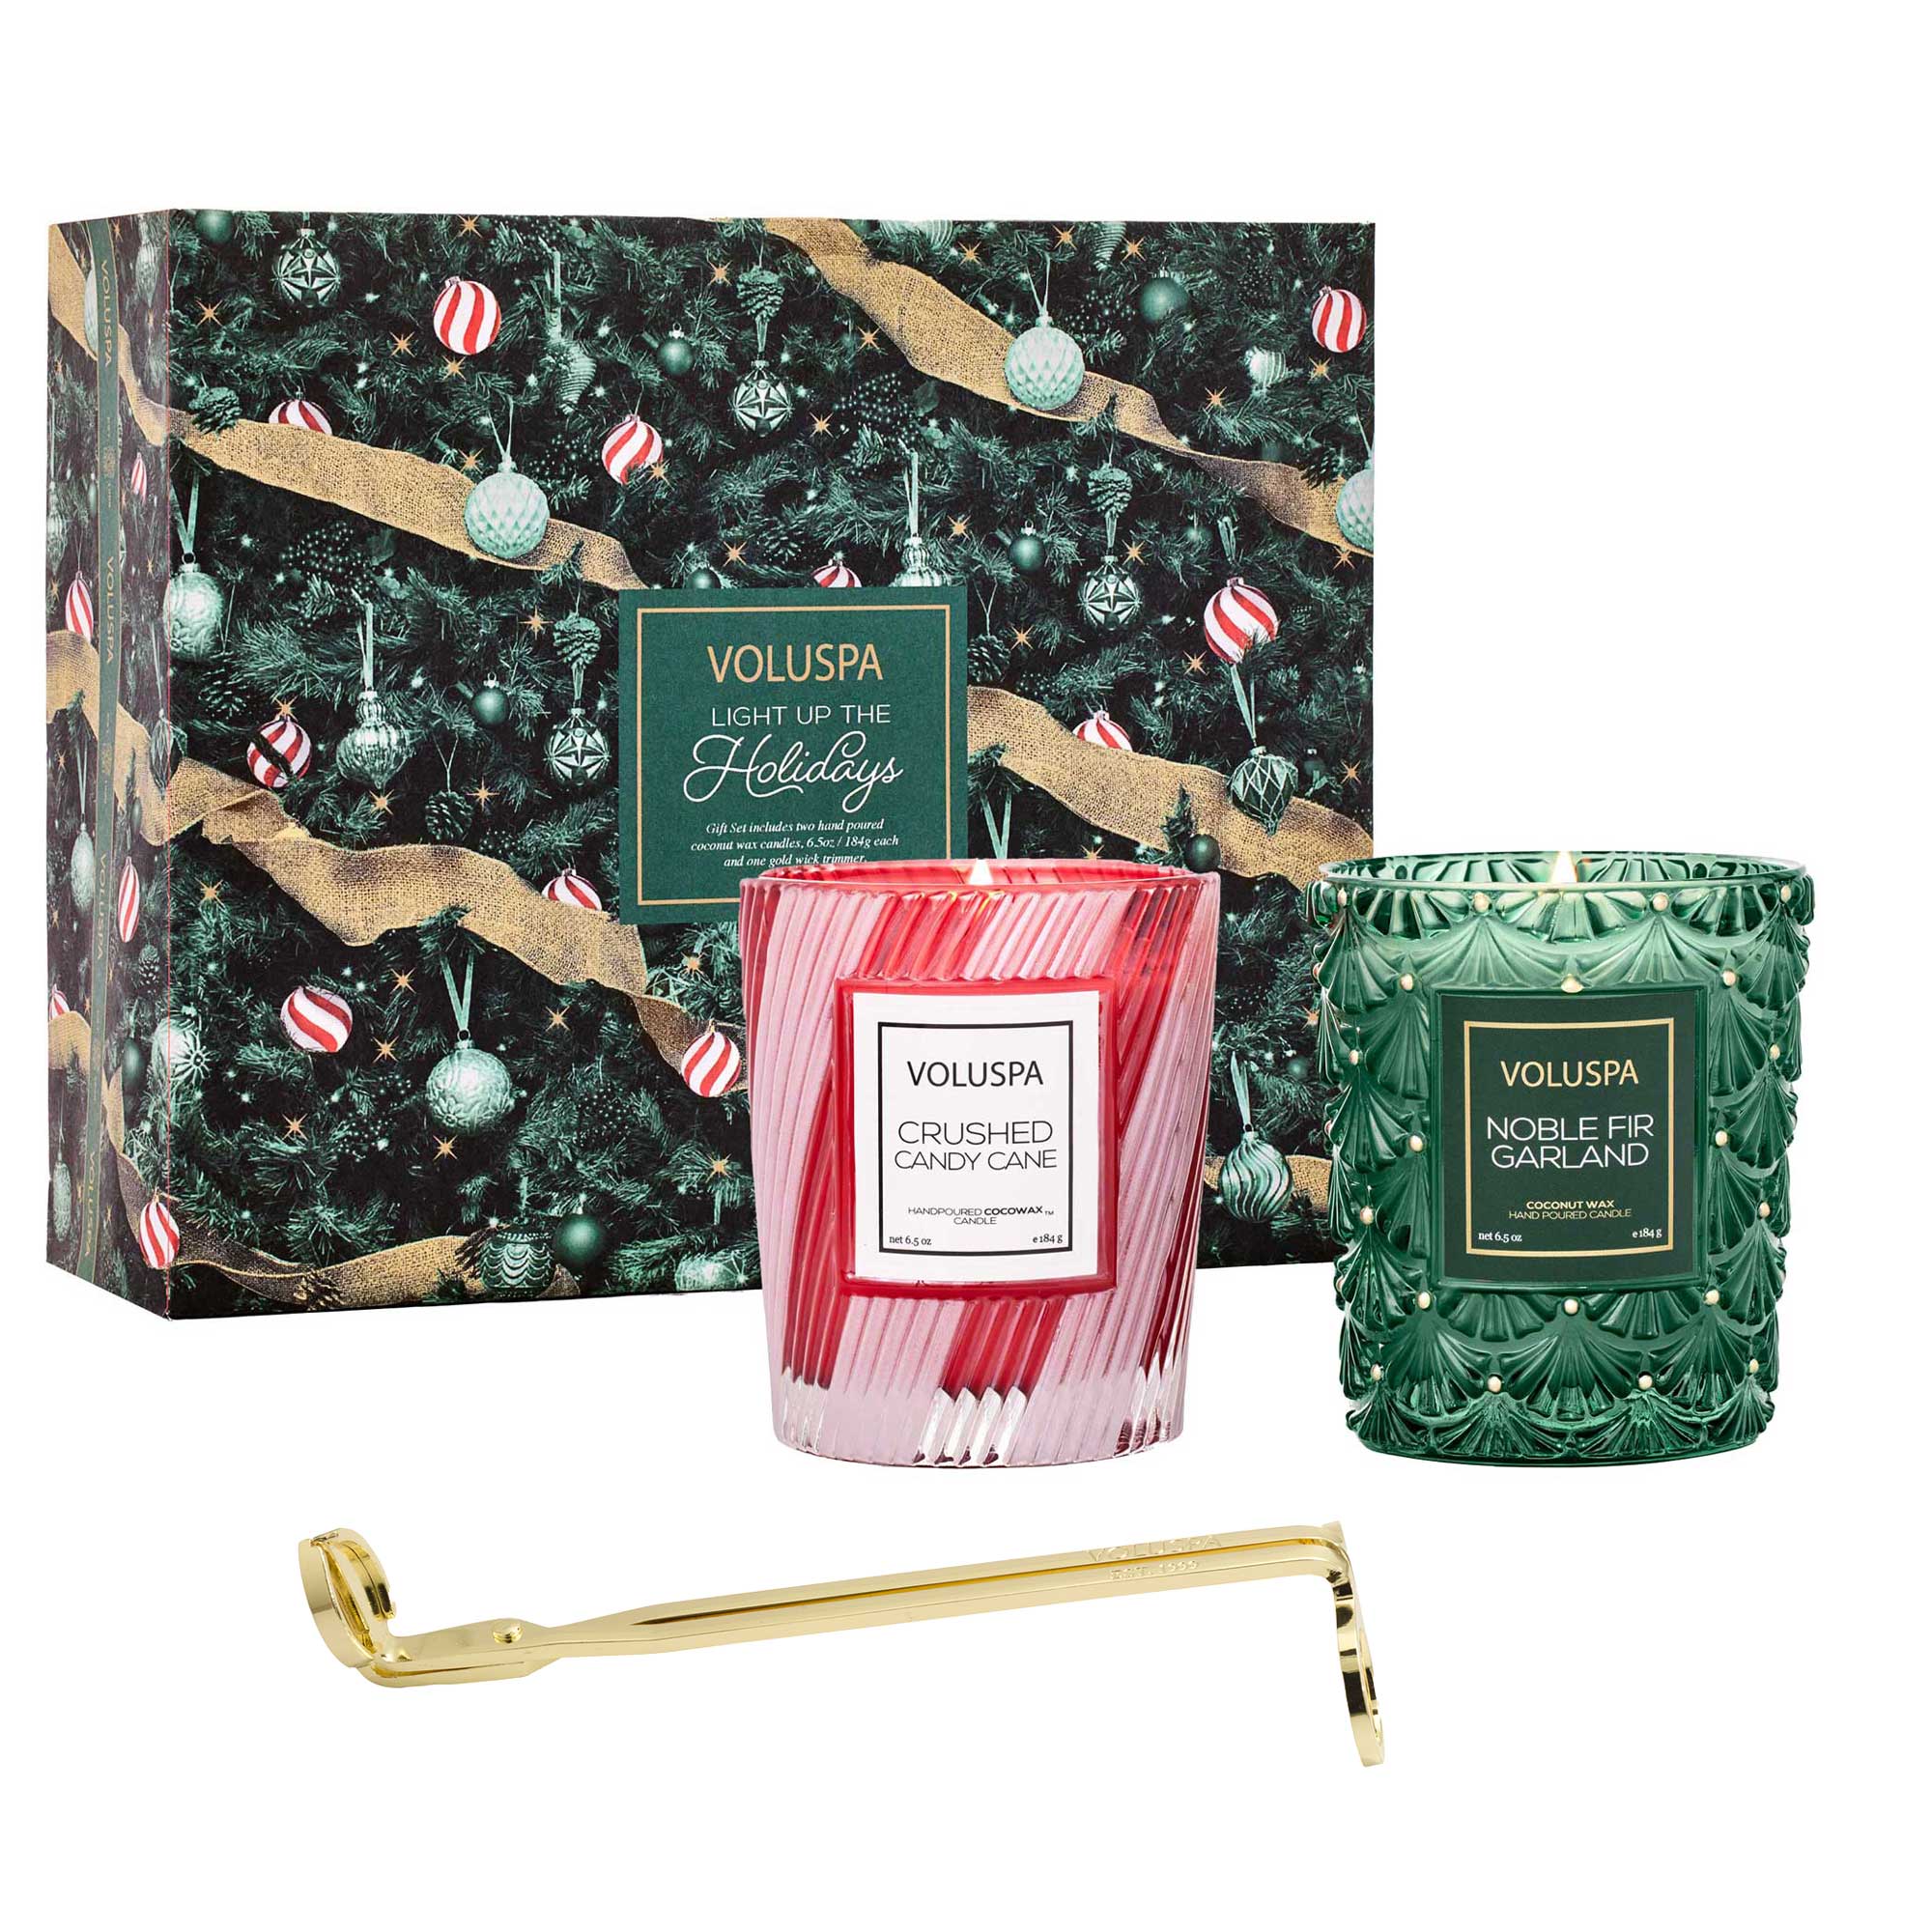 Light Up The Holidays - Classic Candle Gift Set